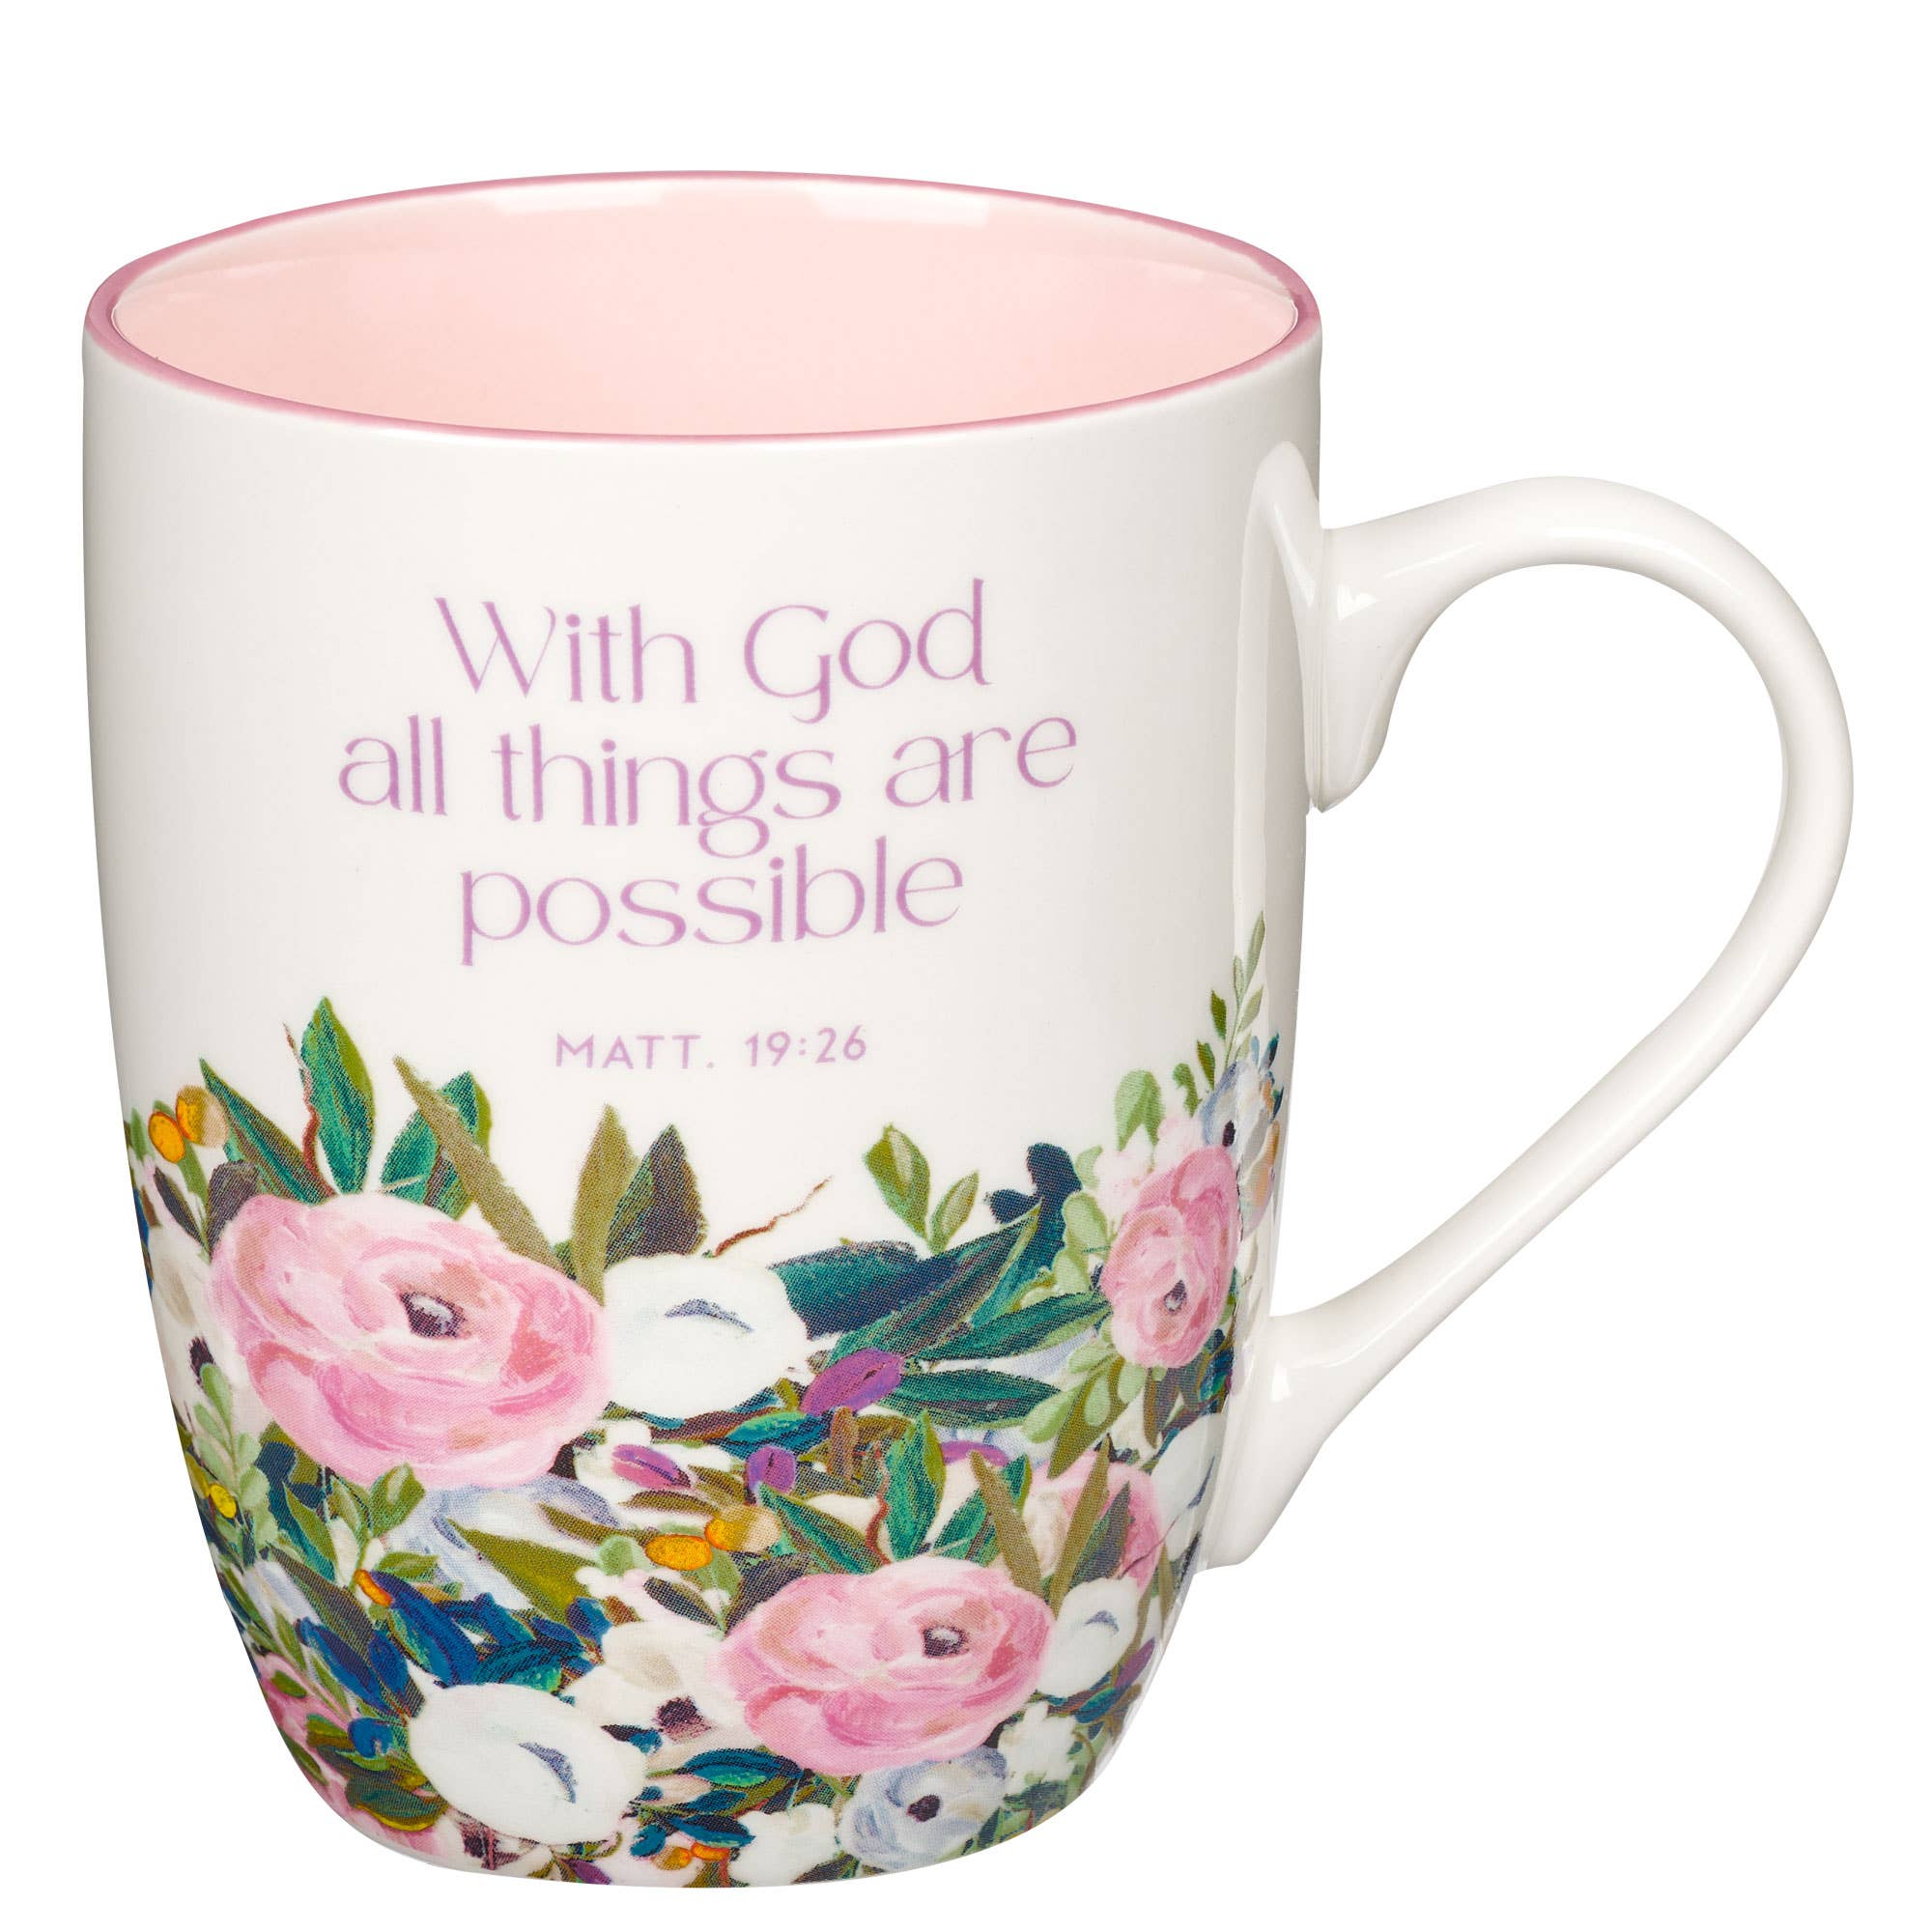 Mug - With God All Things Are Possible Matt. 19:26